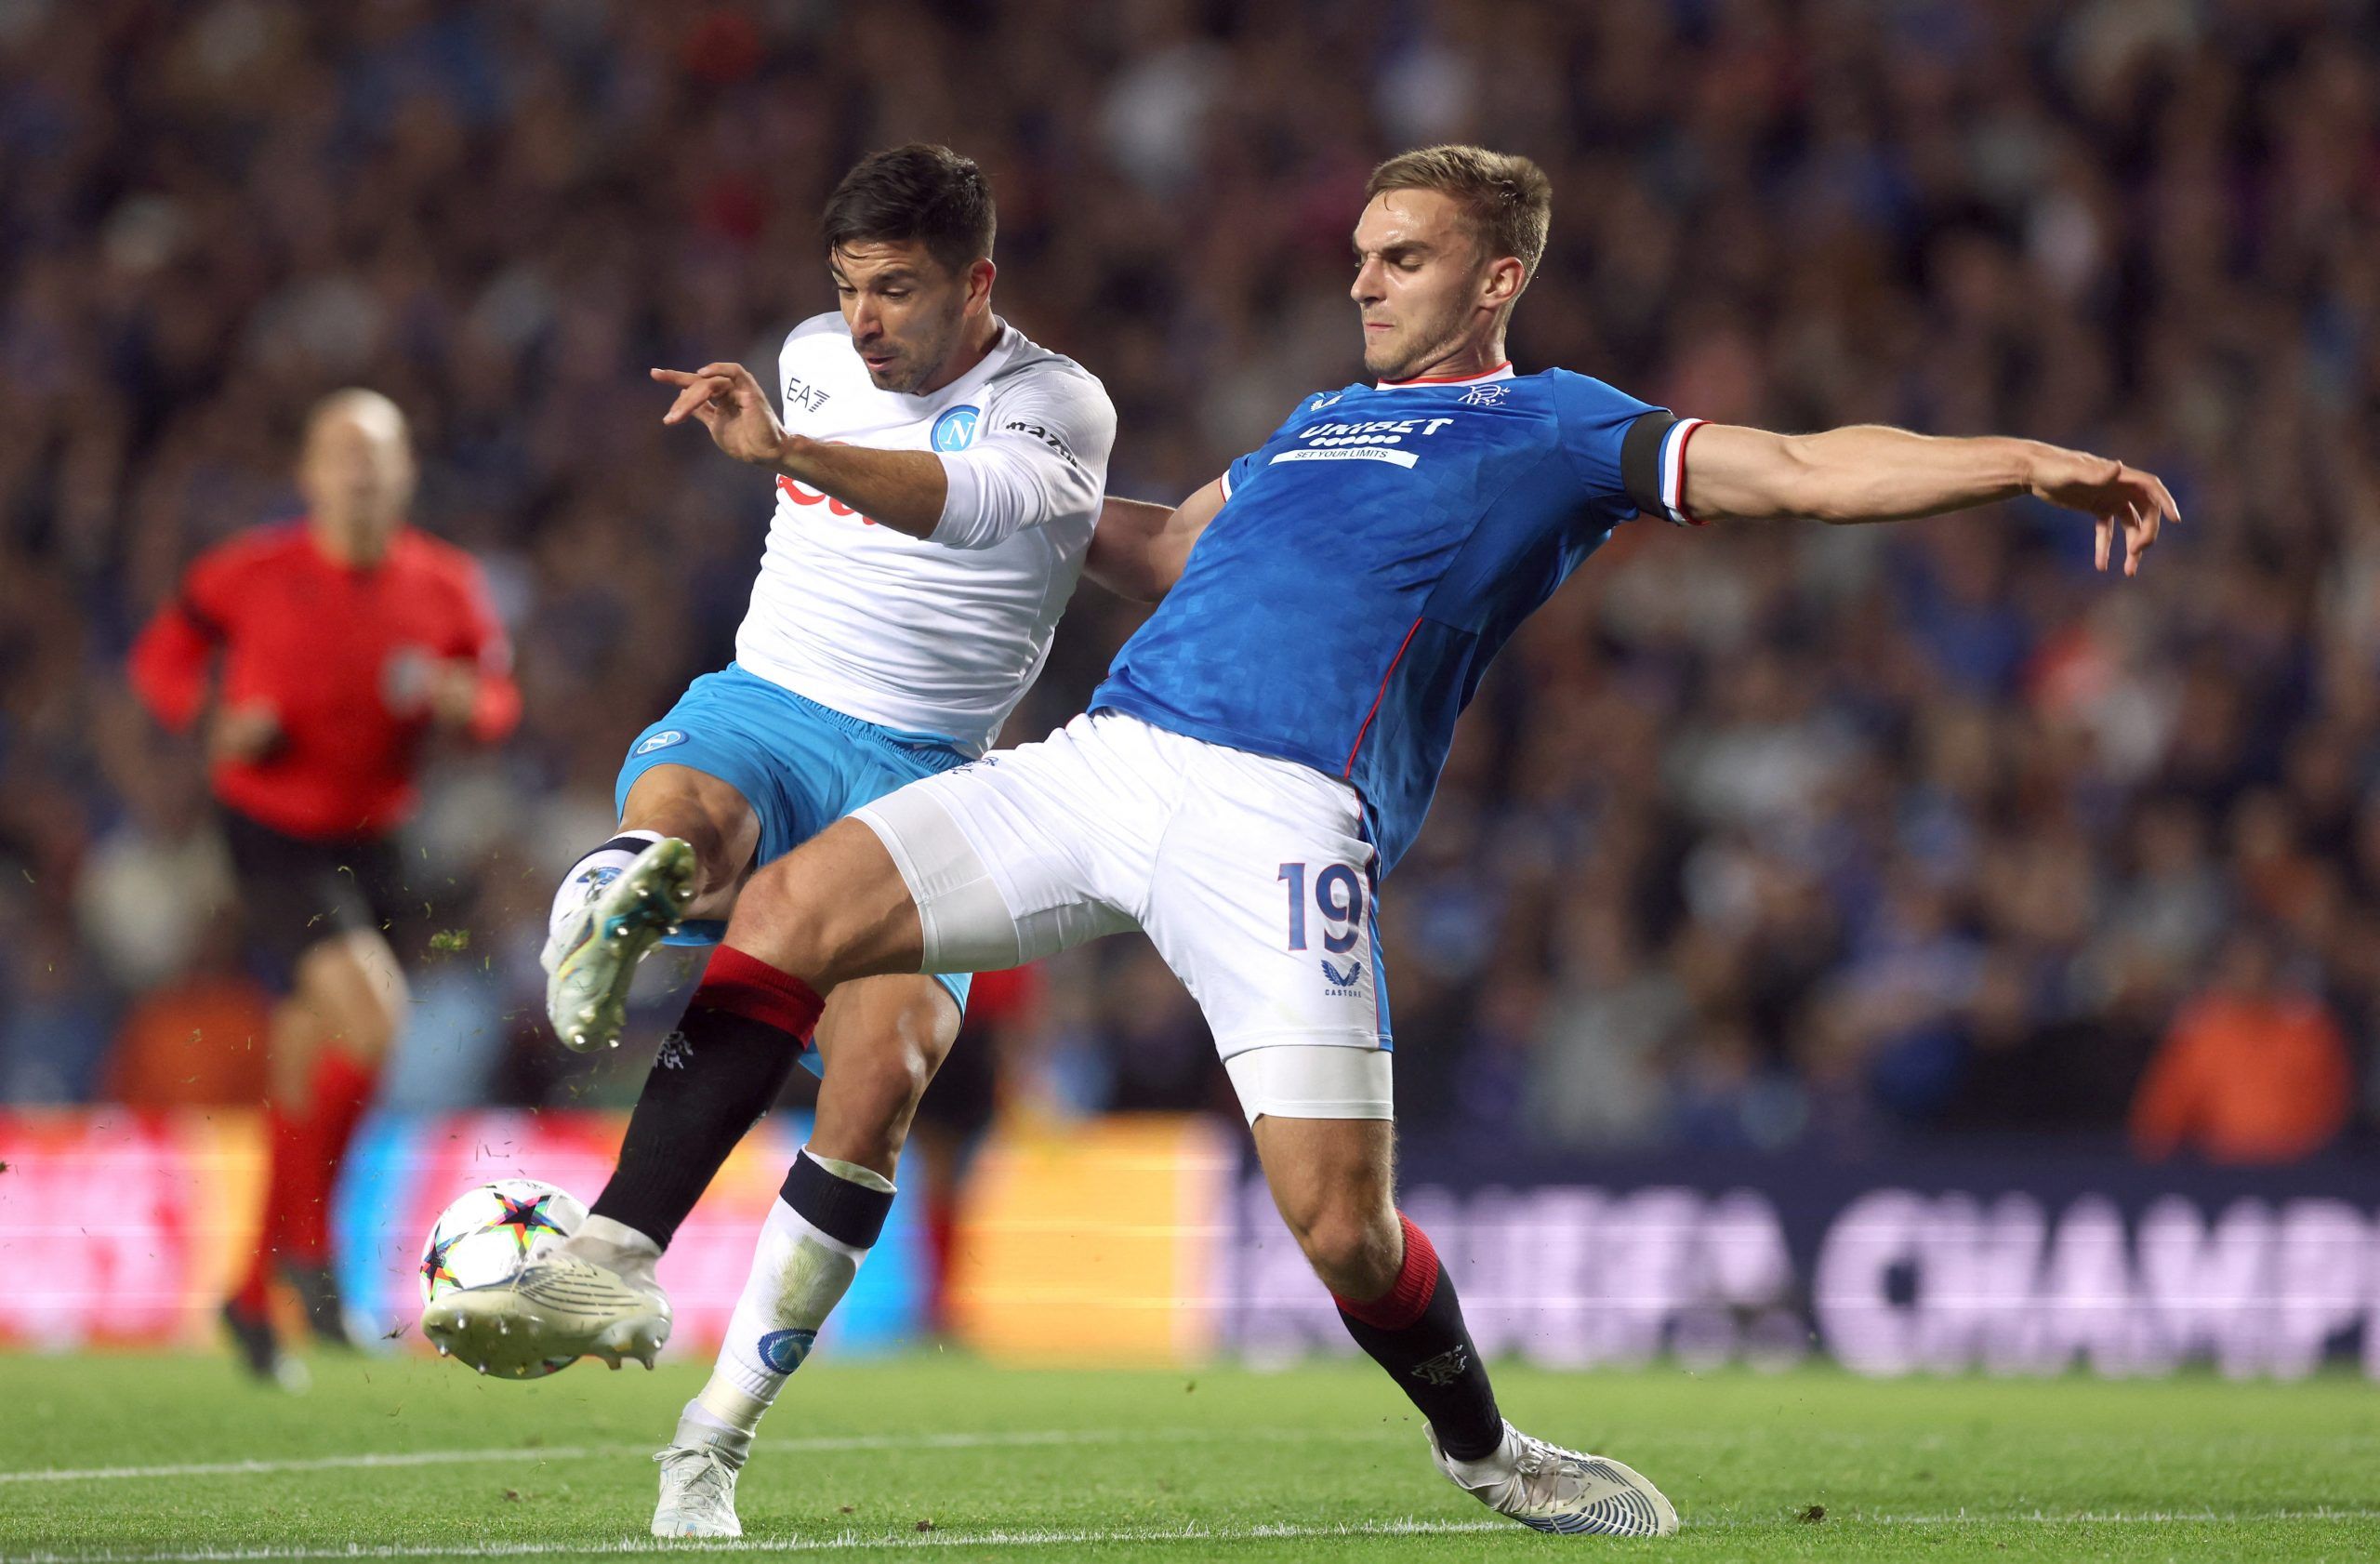 Soccer Football - Champions League - Group A - Rangers v Napoli - Ibrox, Glasgow, Scotland, Britain - September 14, 2022 Napoli's Giovanni Simeone in action with Rangers' James Sands Action Images via Reuters/Lee Smith